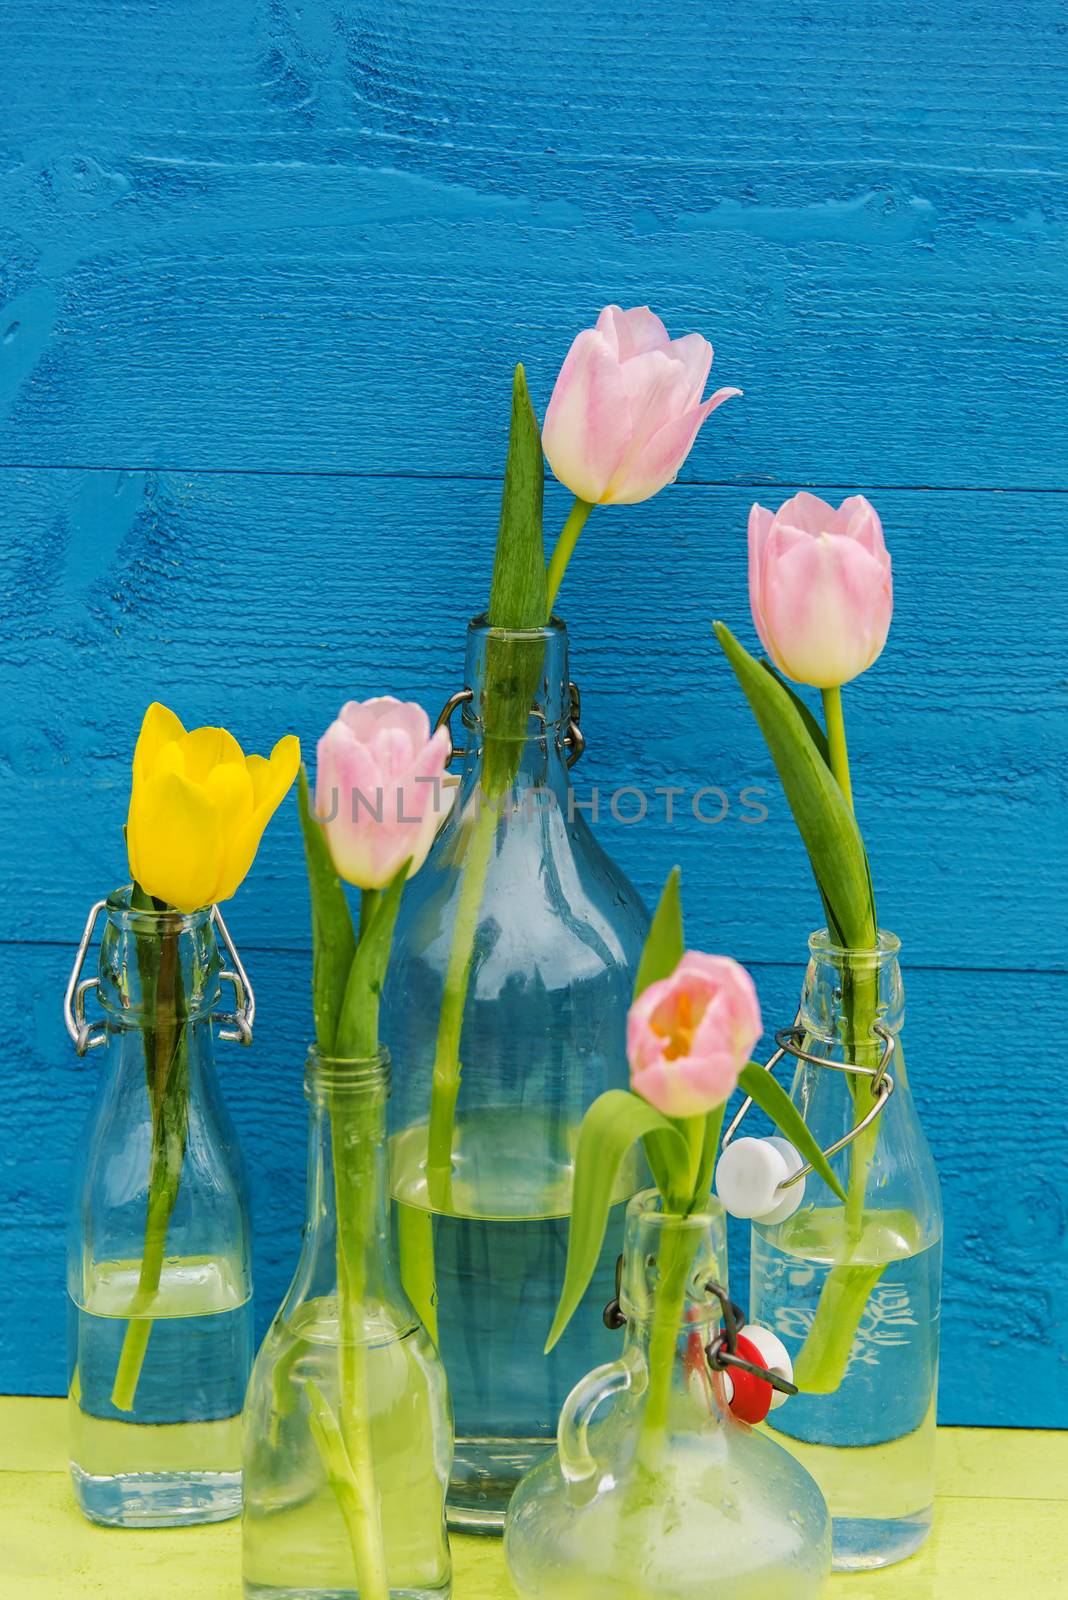 Pink and a yellow tulips in a collection of small glass bottles against a cobalt blue wooden wall. Vertical image